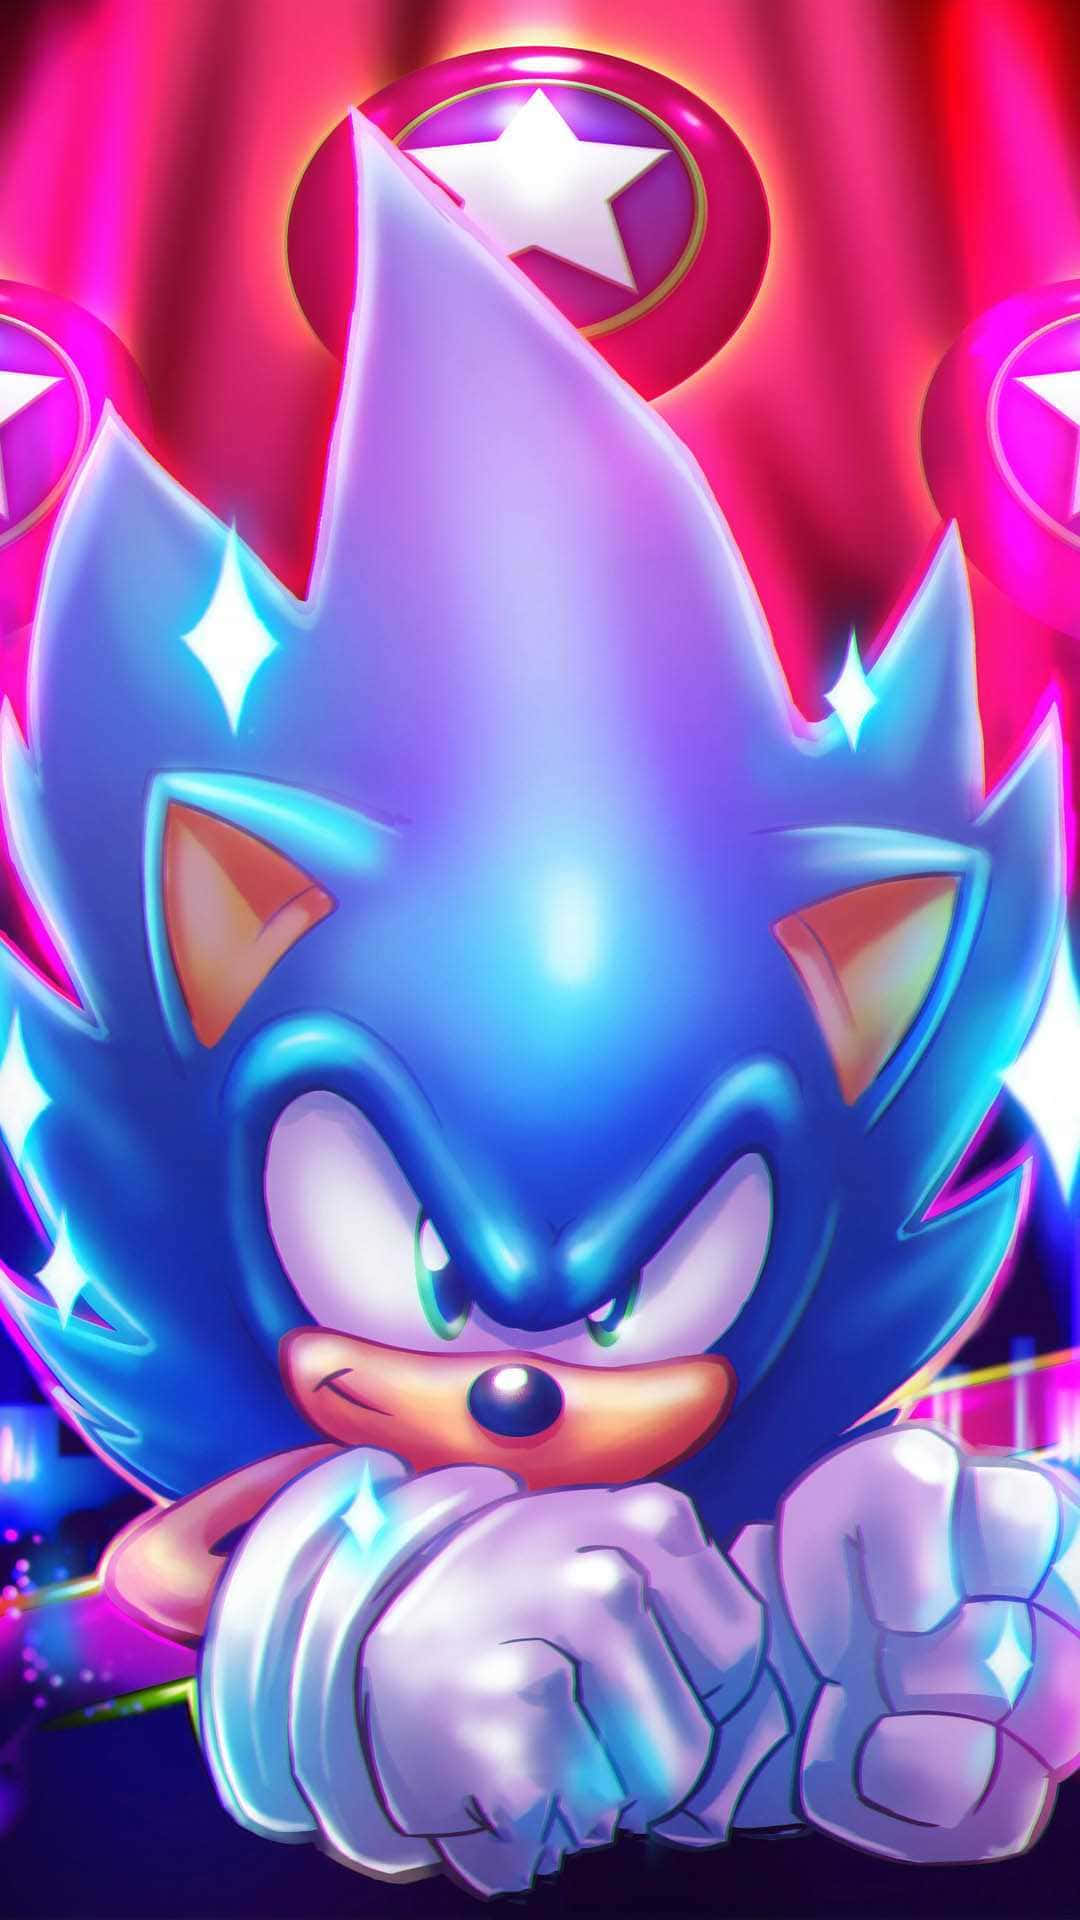 Sonic and Friends in Colorful Dimension Wallpaper